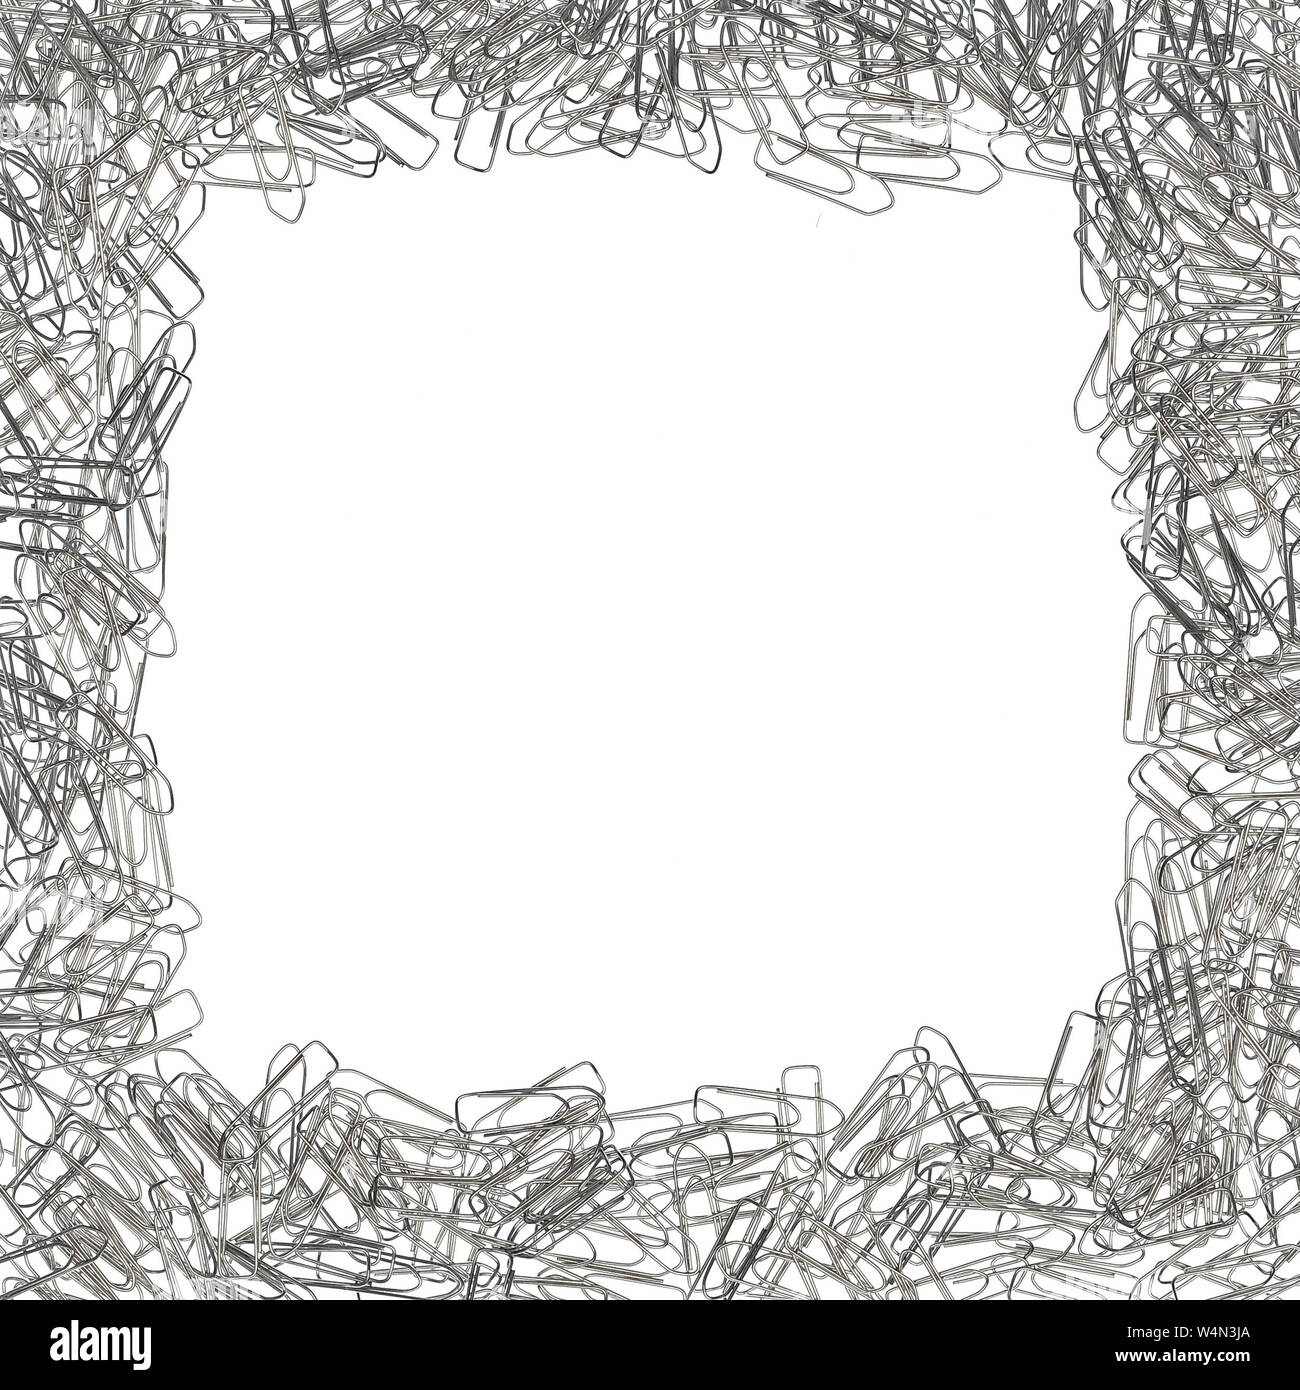 square frame made up of a border of metal paper clips Stock Photo